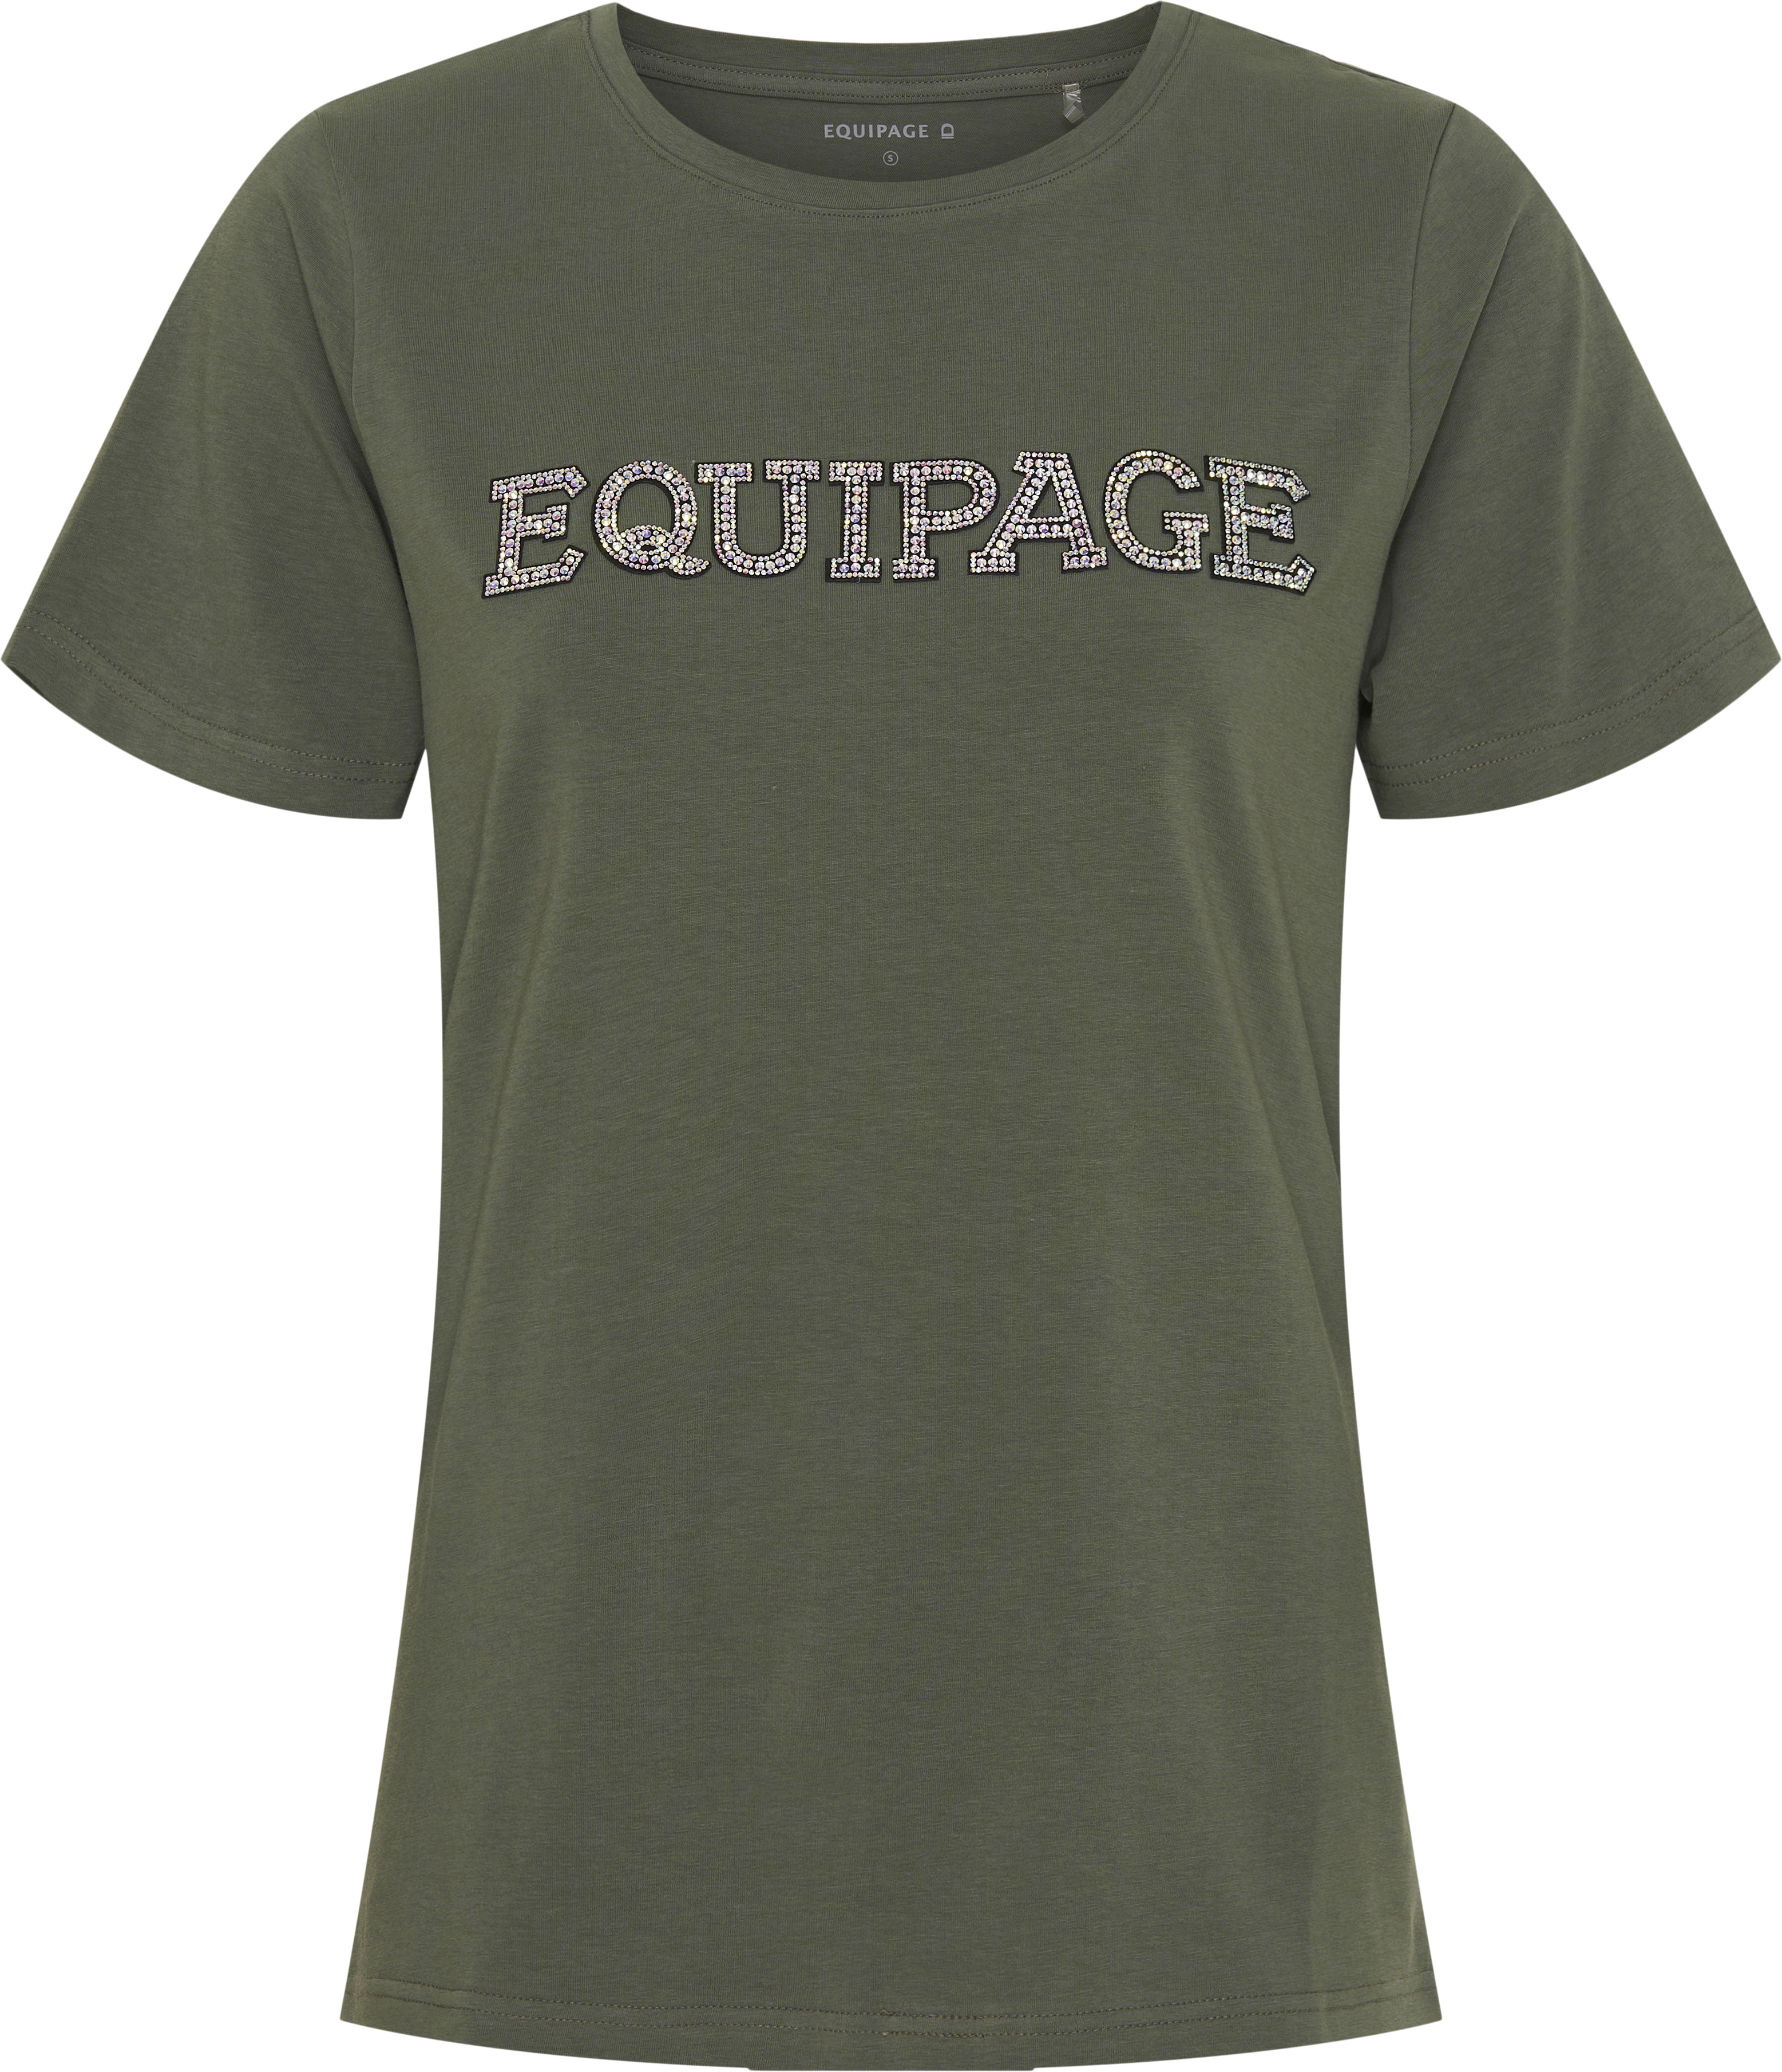 Equipage Melina T-Shirt - Forest (S)